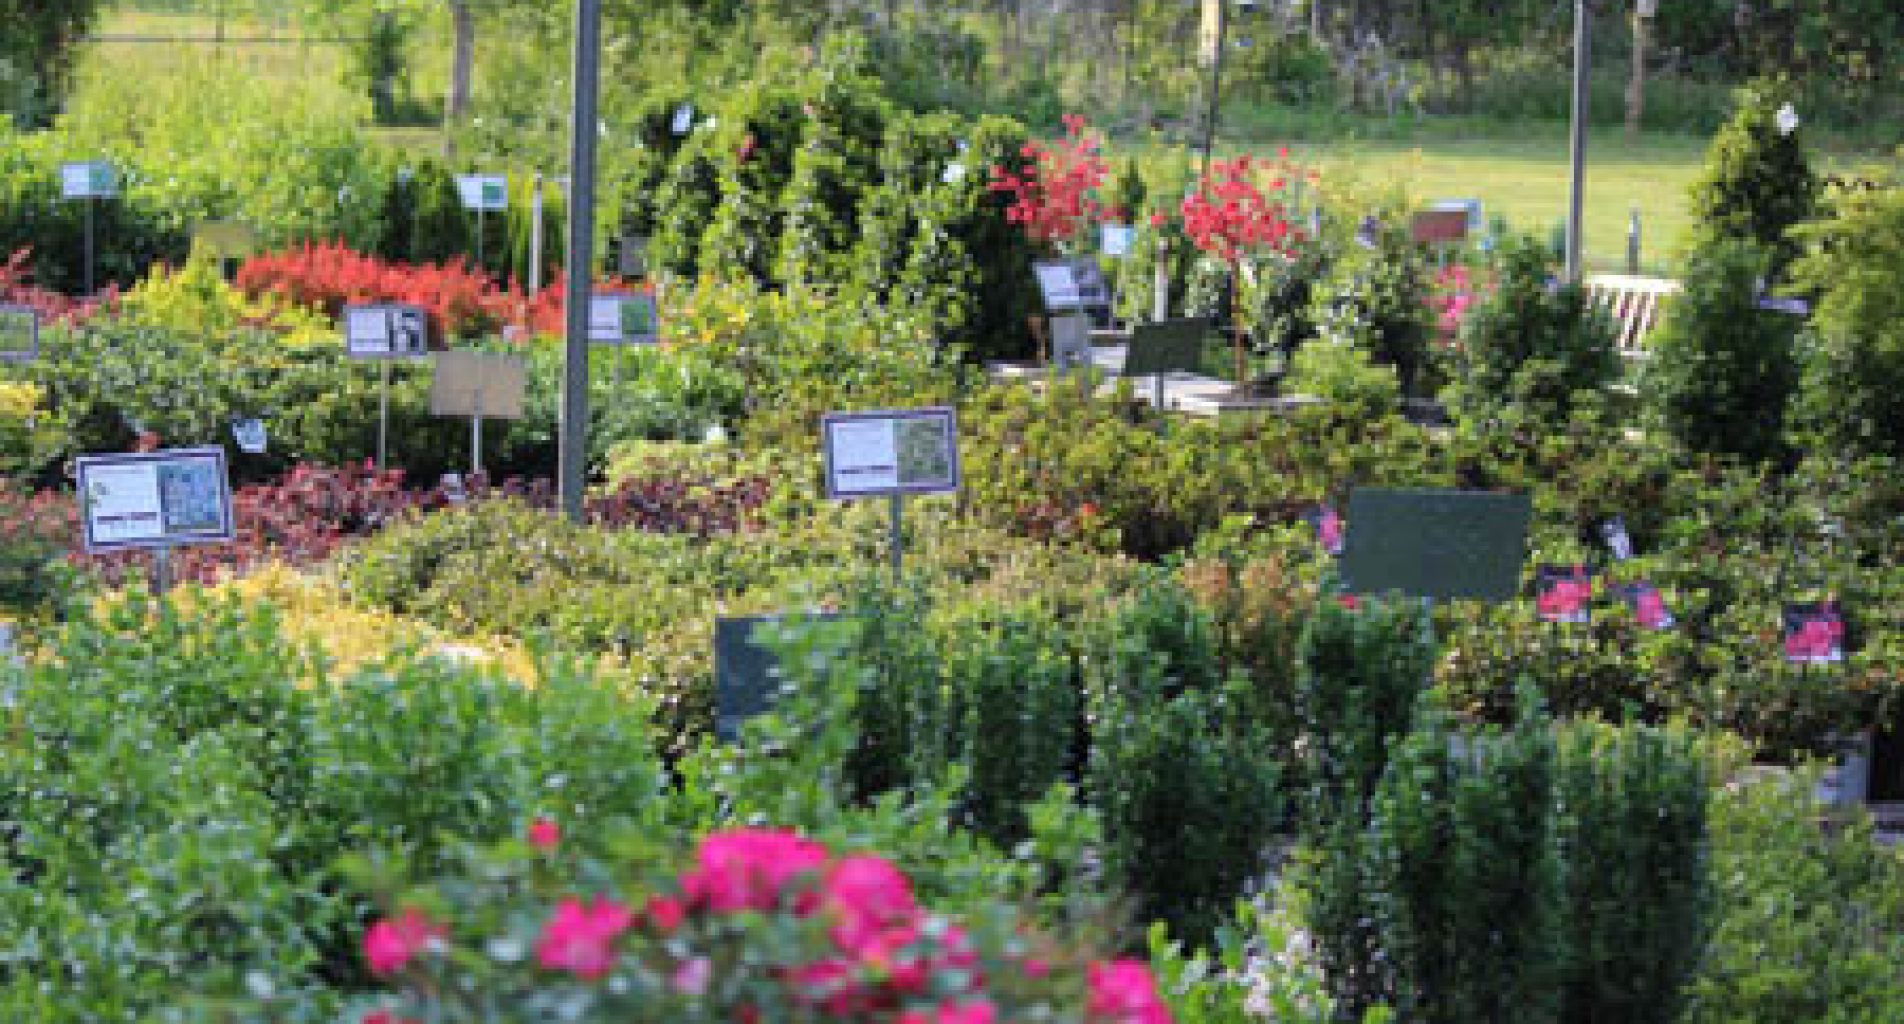 Roses, trees and shrubs for sale at Homestead Garden Center, Williamsburg